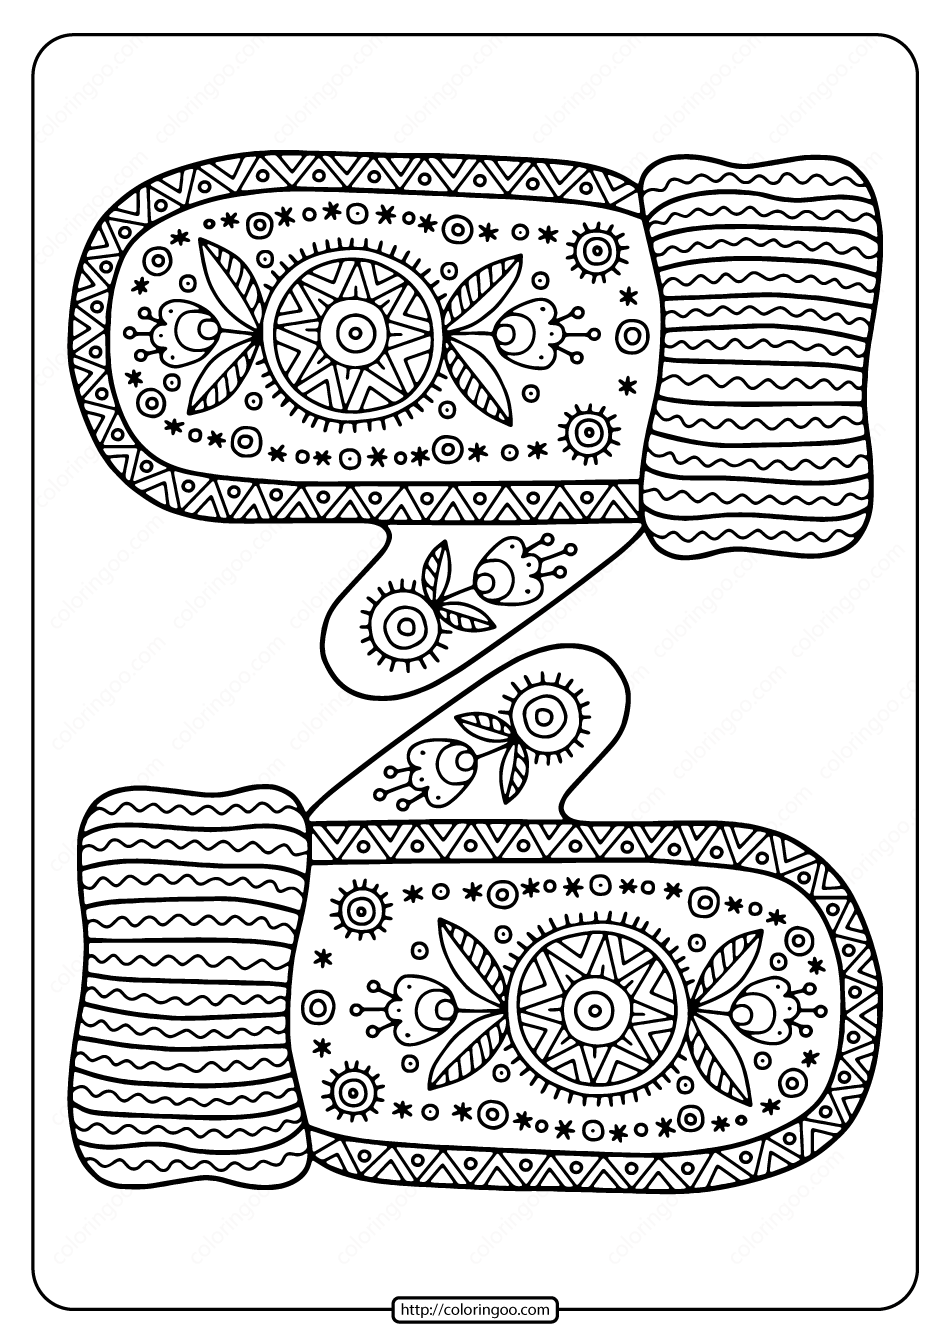 free printable warm knitted mittens coloring page